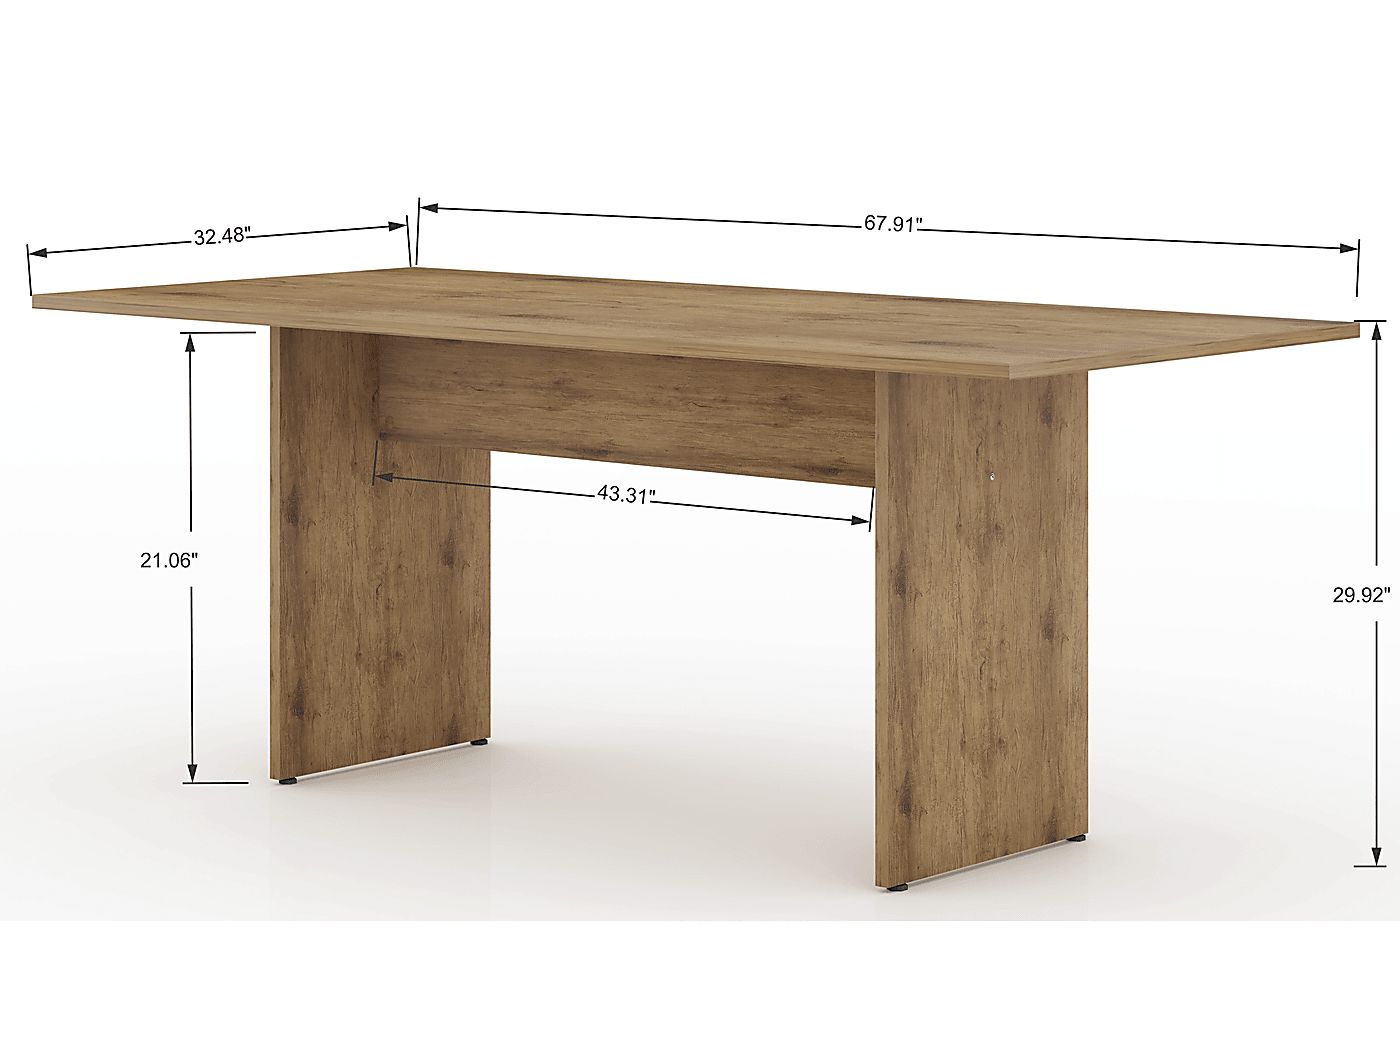 Volco Brown Dining Table